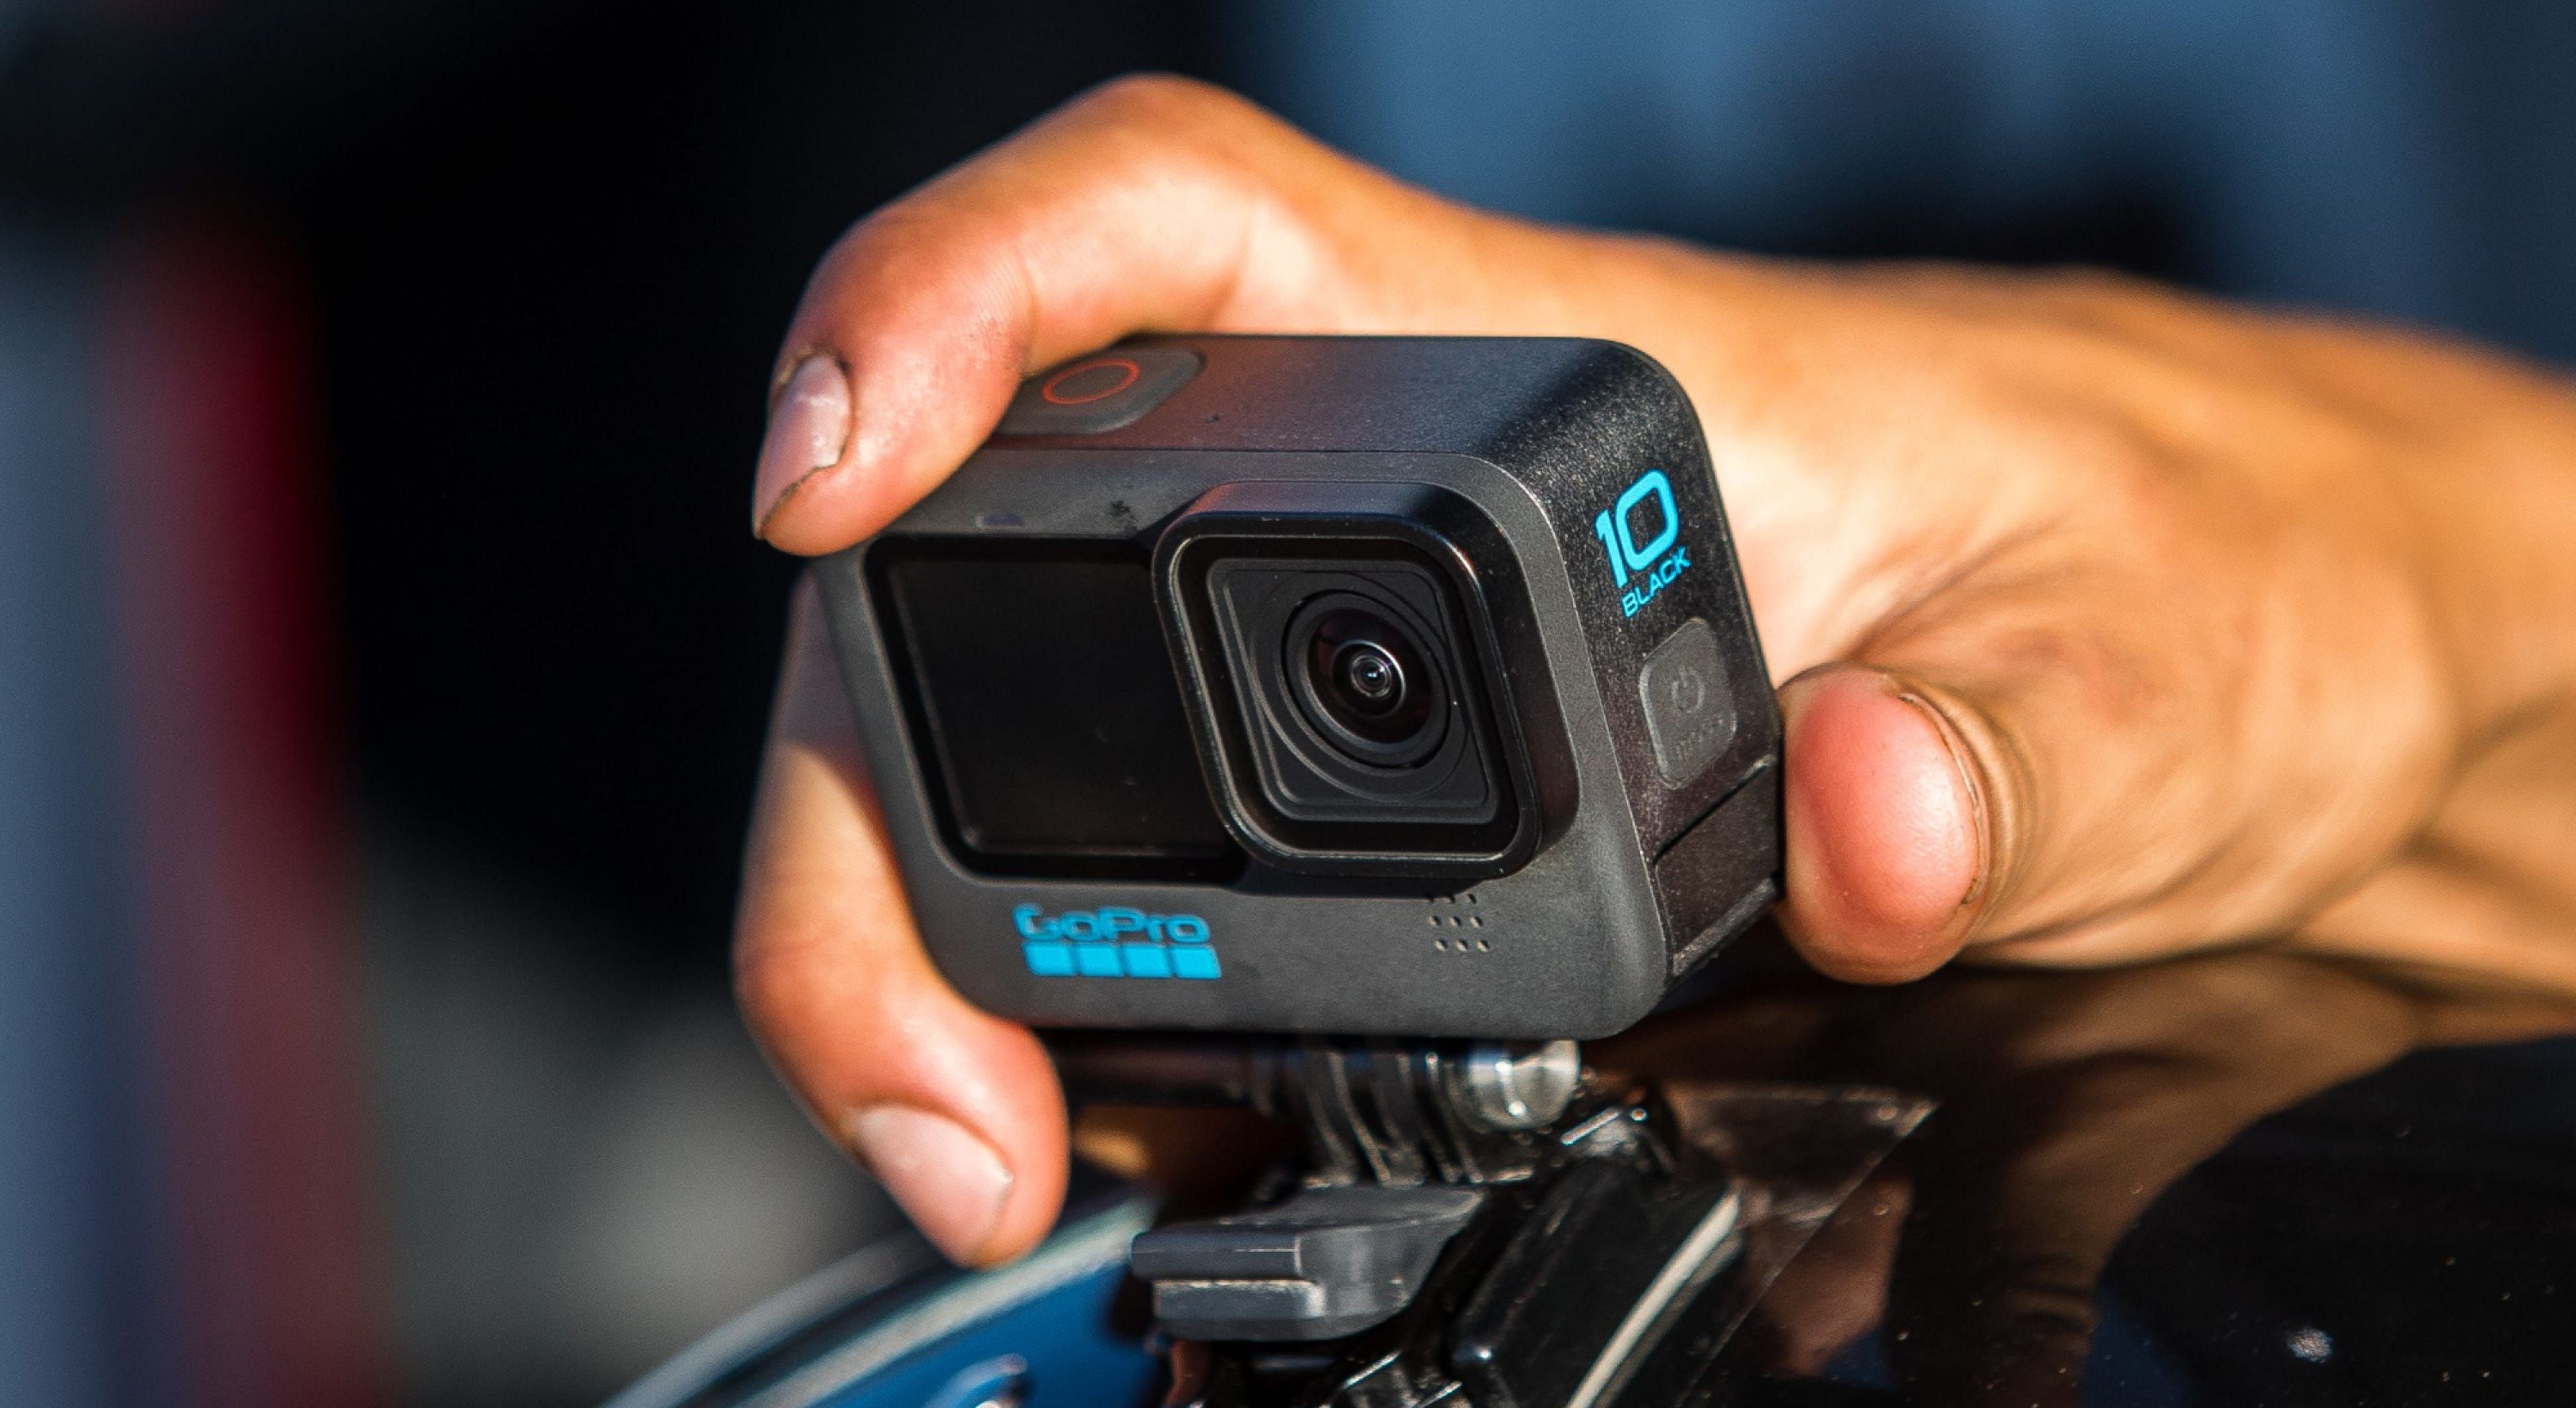 RW Tested: The All New GoPro Hero Black